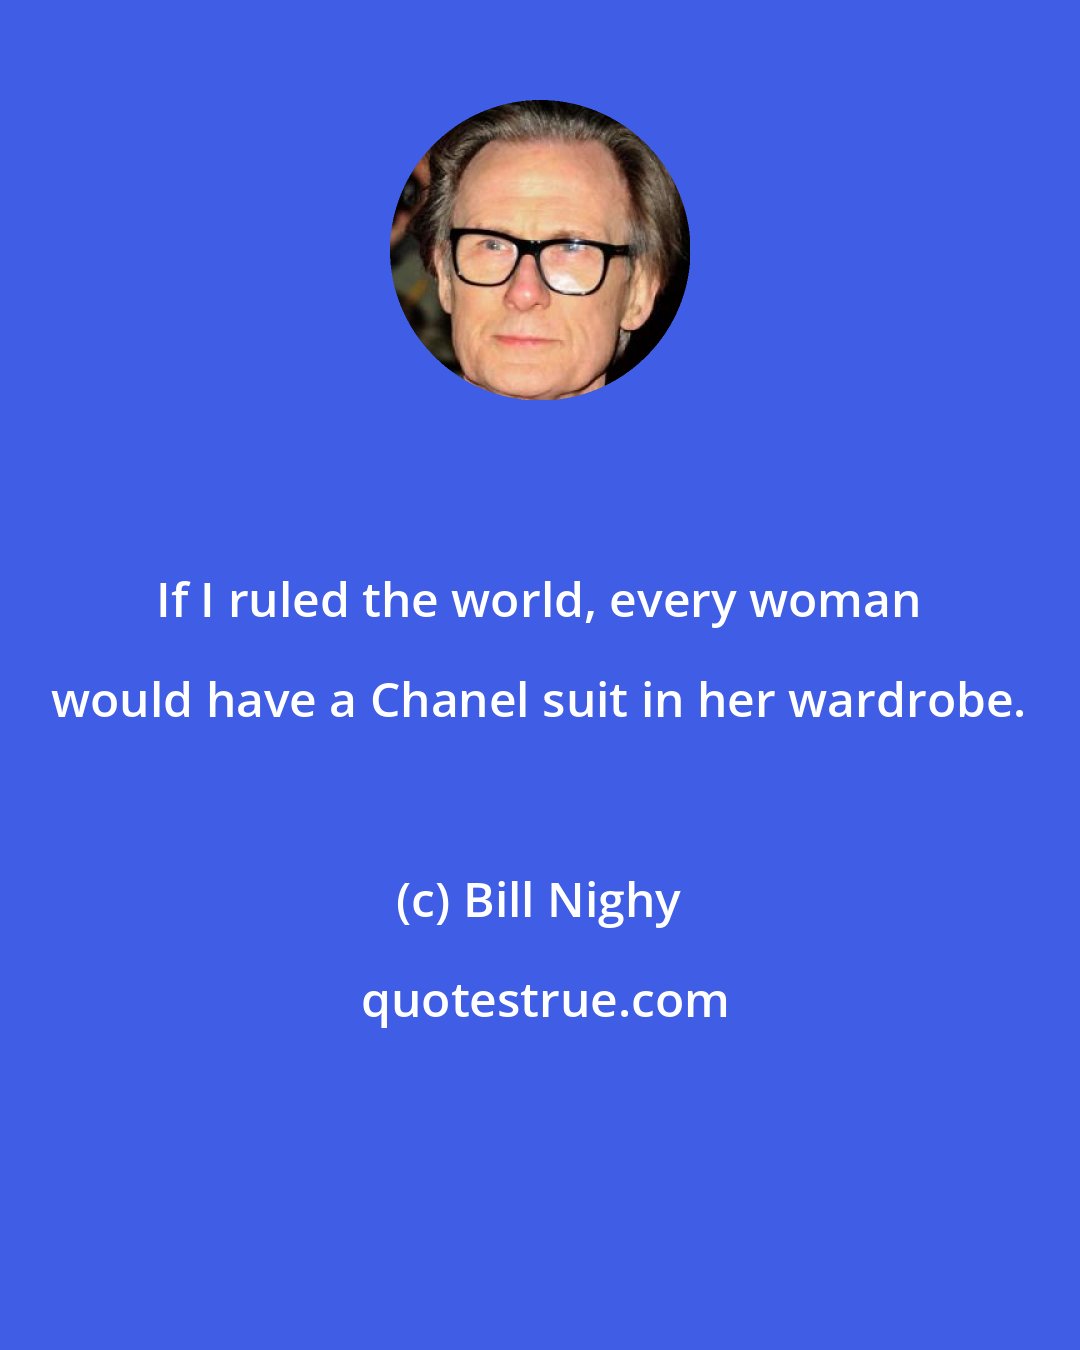 Bill Nighy: If I ruled the world, every woman would have a Chanel suit in her wardrobe.